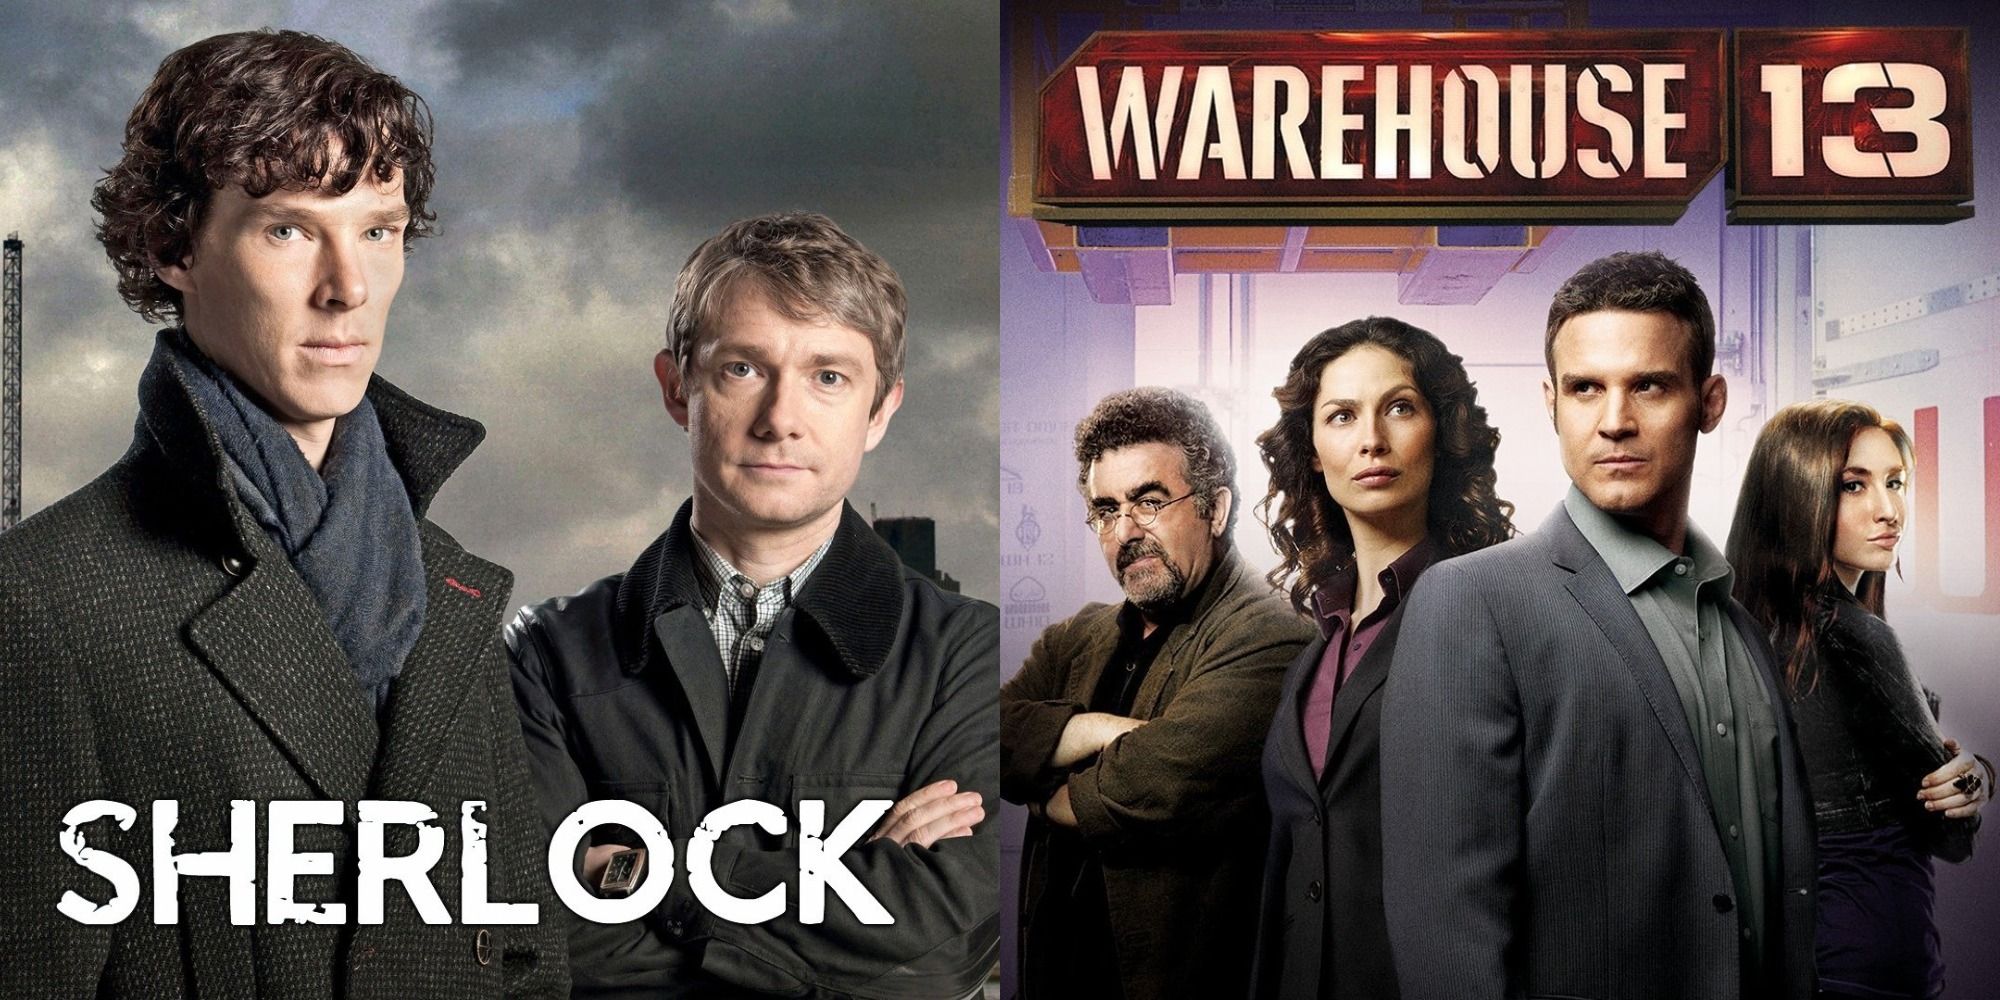 An image of John and Sherlock in Sherlock and the cast of Warehouse 13